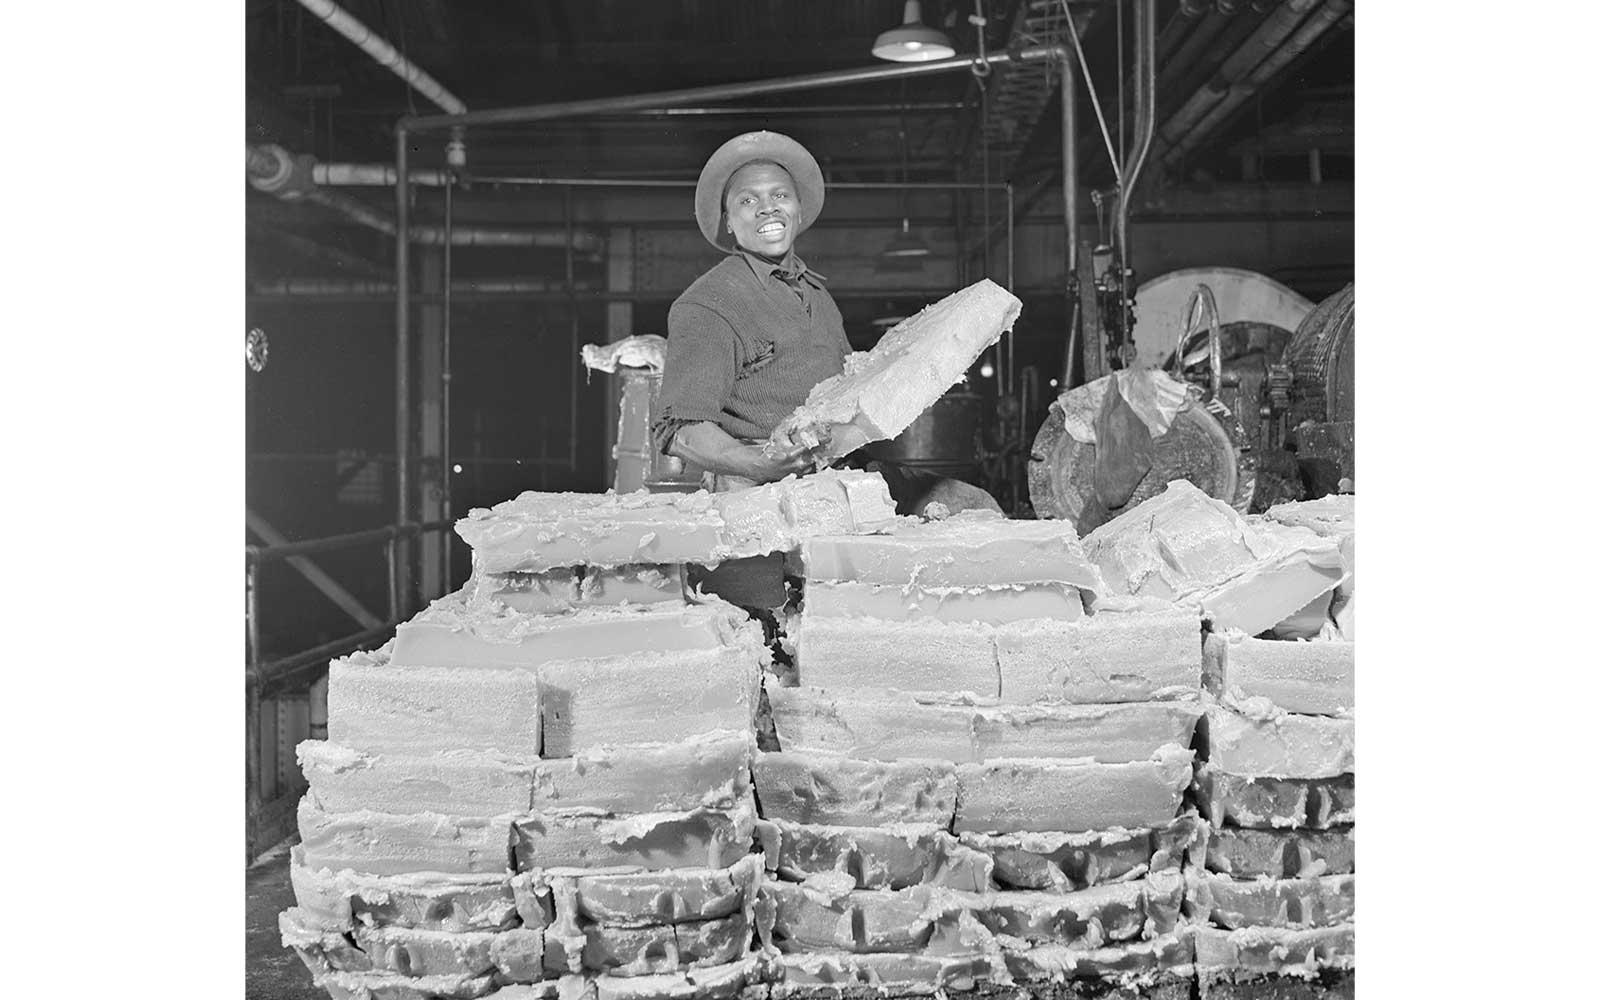 Gordon Parks, Large squares of grease that have been cooled in pans. Although not extremely hard, the cakes are solid enough to pick up in one piece, March 1944.